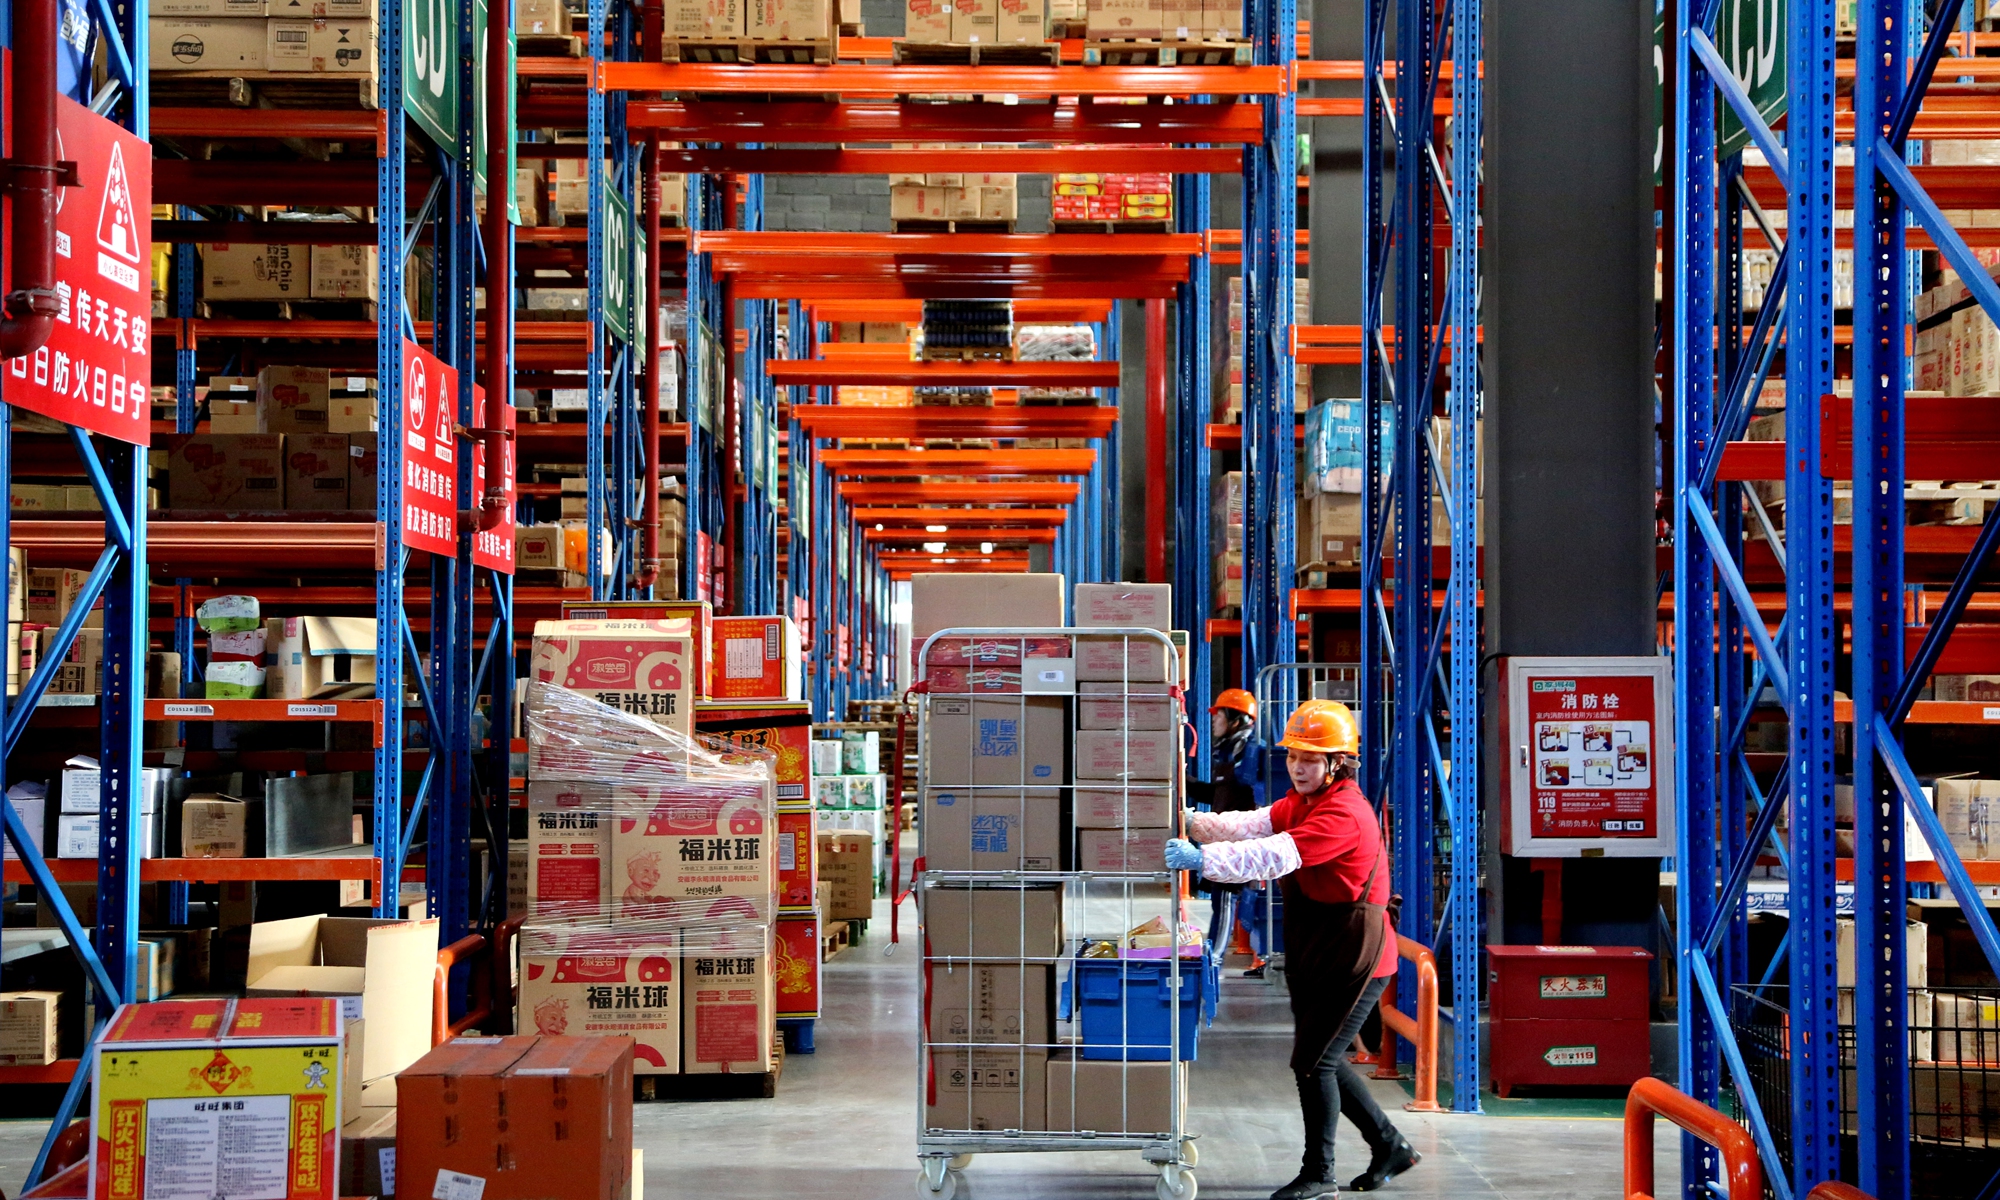 A worker arranges goods at a warehouse of an e-commerce platform at Lianyungang, East China's Jiangsu Province on Tuesday. Online retailers have been working day and night to prepare for the upcoming Double 12 shopping festival. Photo: CNSphoto